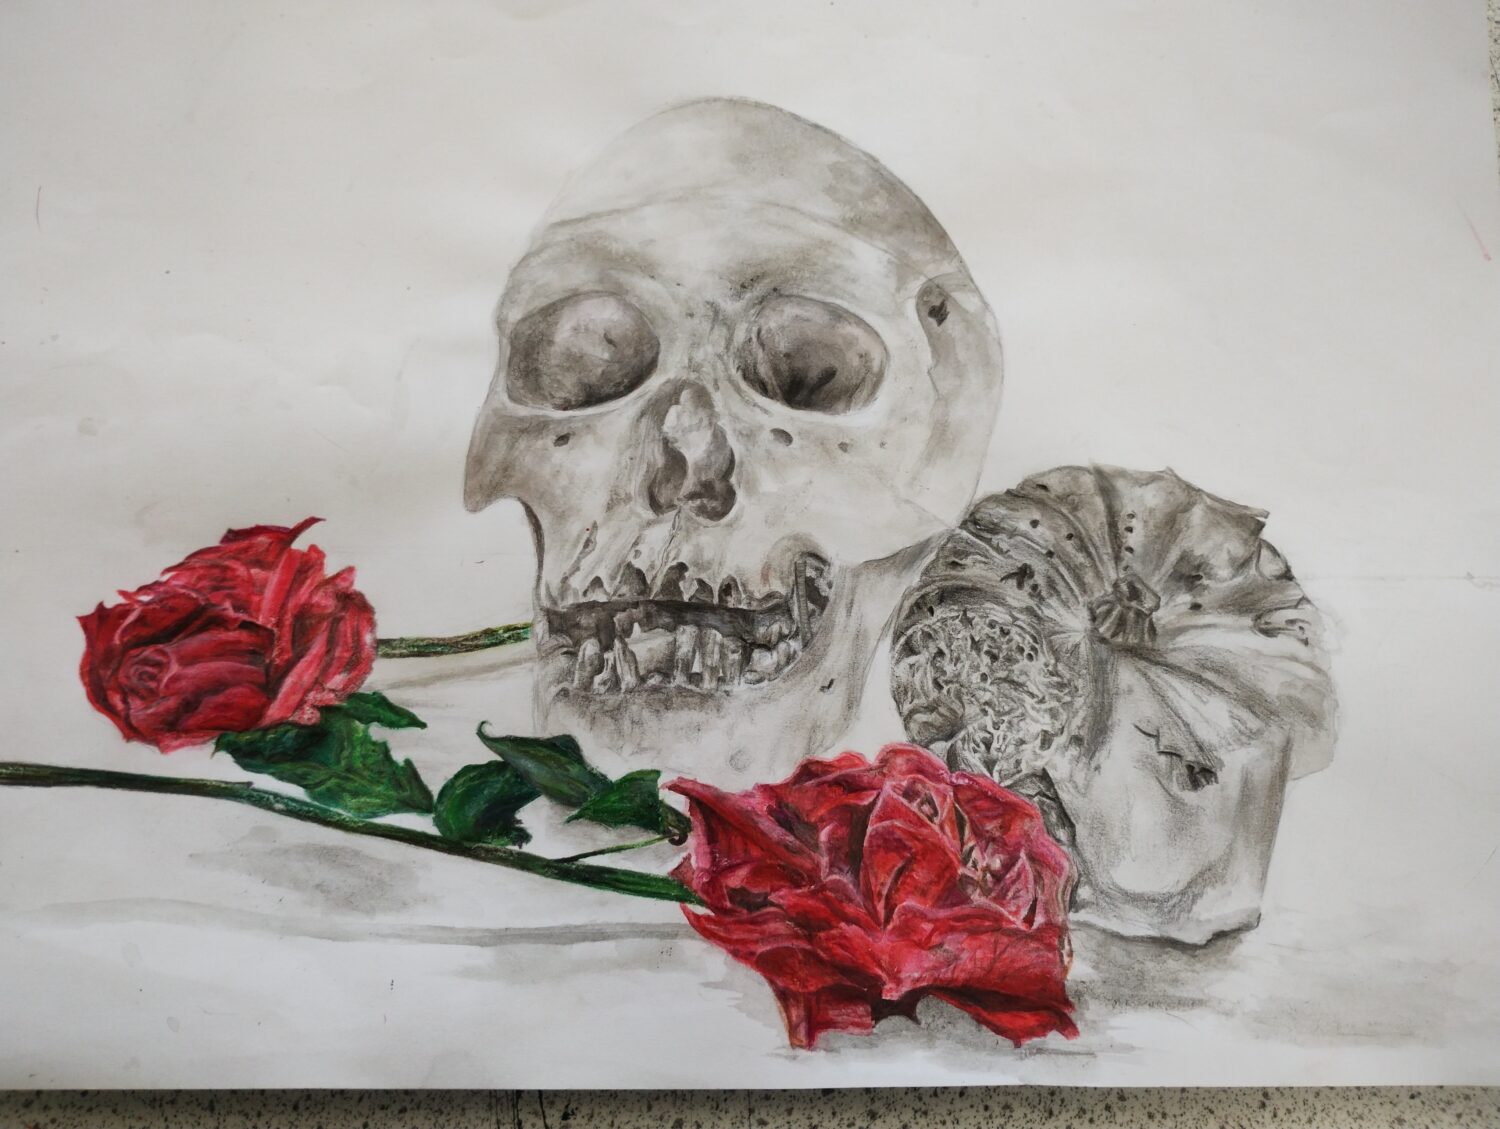 A student's artwork of a skull, pumpkin and two roses